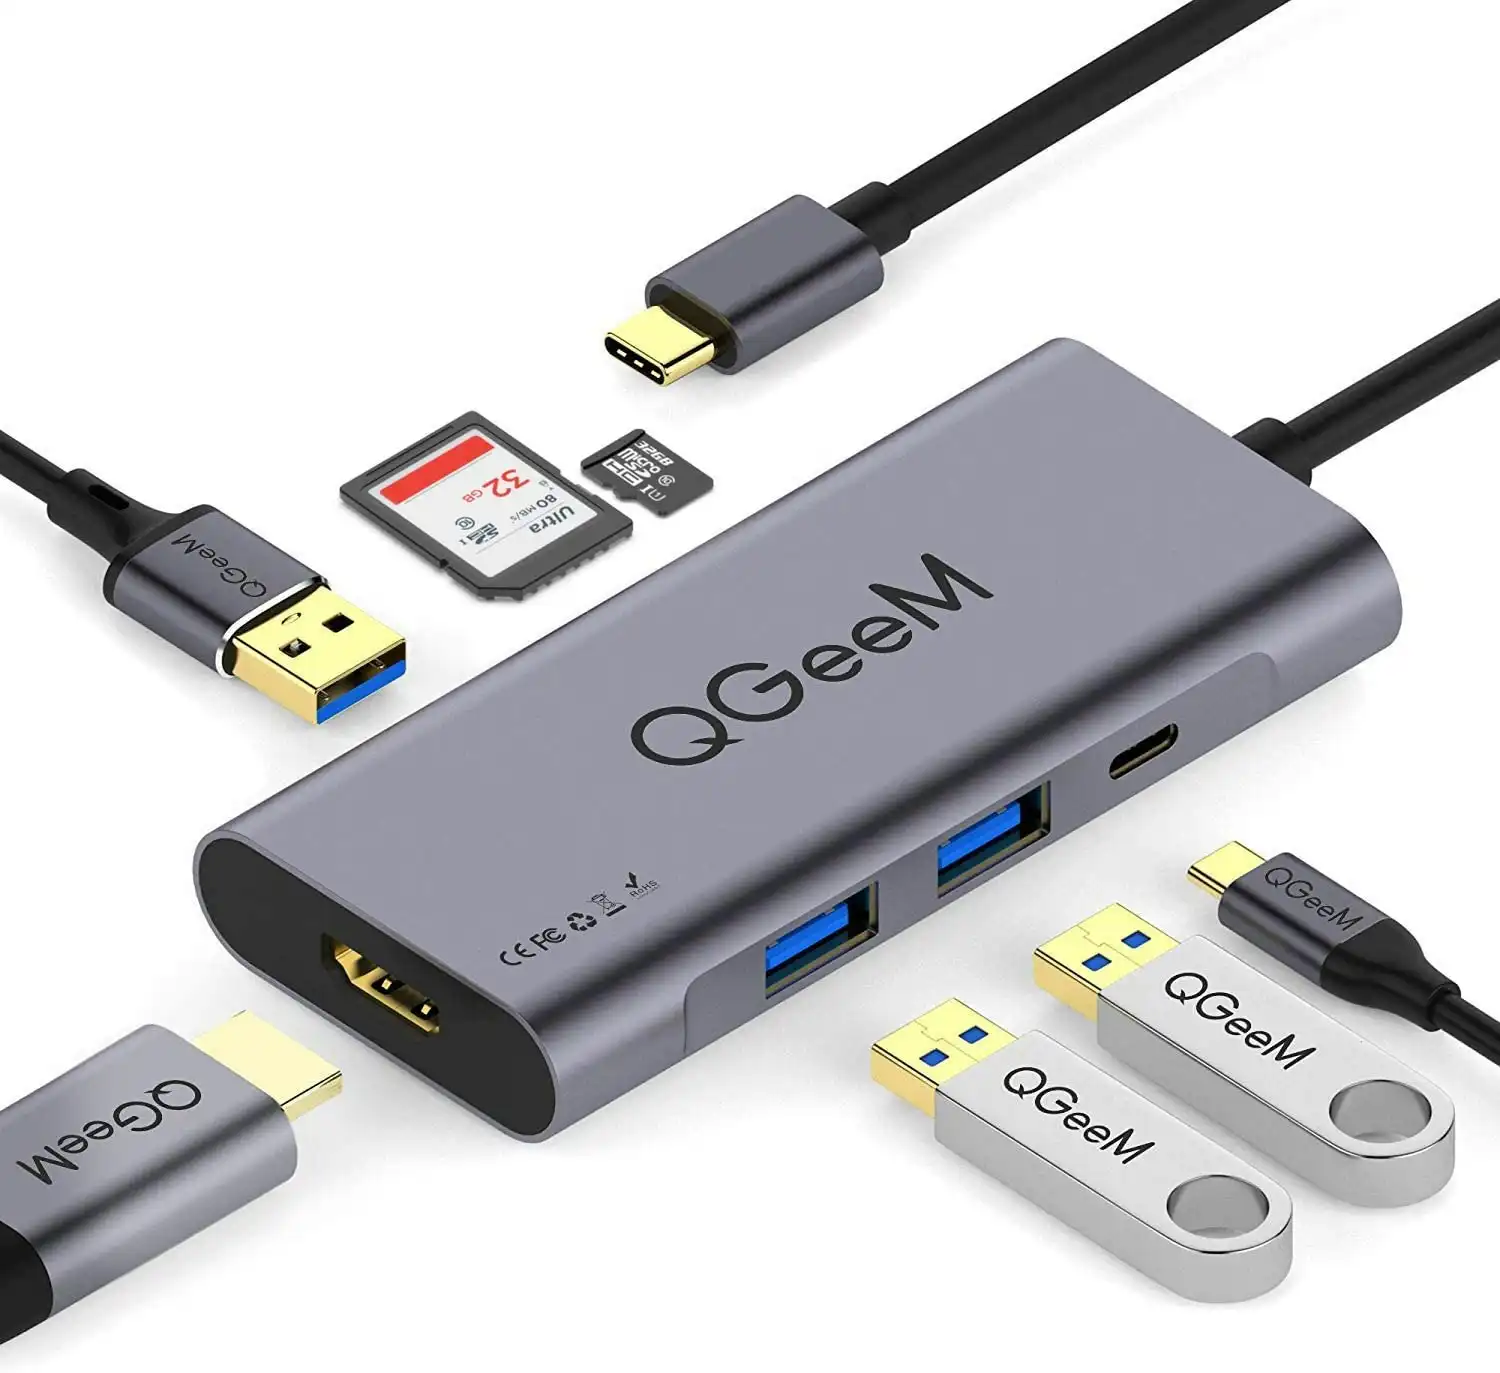 QGeeM USB C Hub HDMI Adapter, 7 in 1 Type C Hub to HDMI 4k,3 USB 3.0 Ports,100W Power Delivery,SD/TF Card Readers Compatible with MacBook Pro 13/15(Th